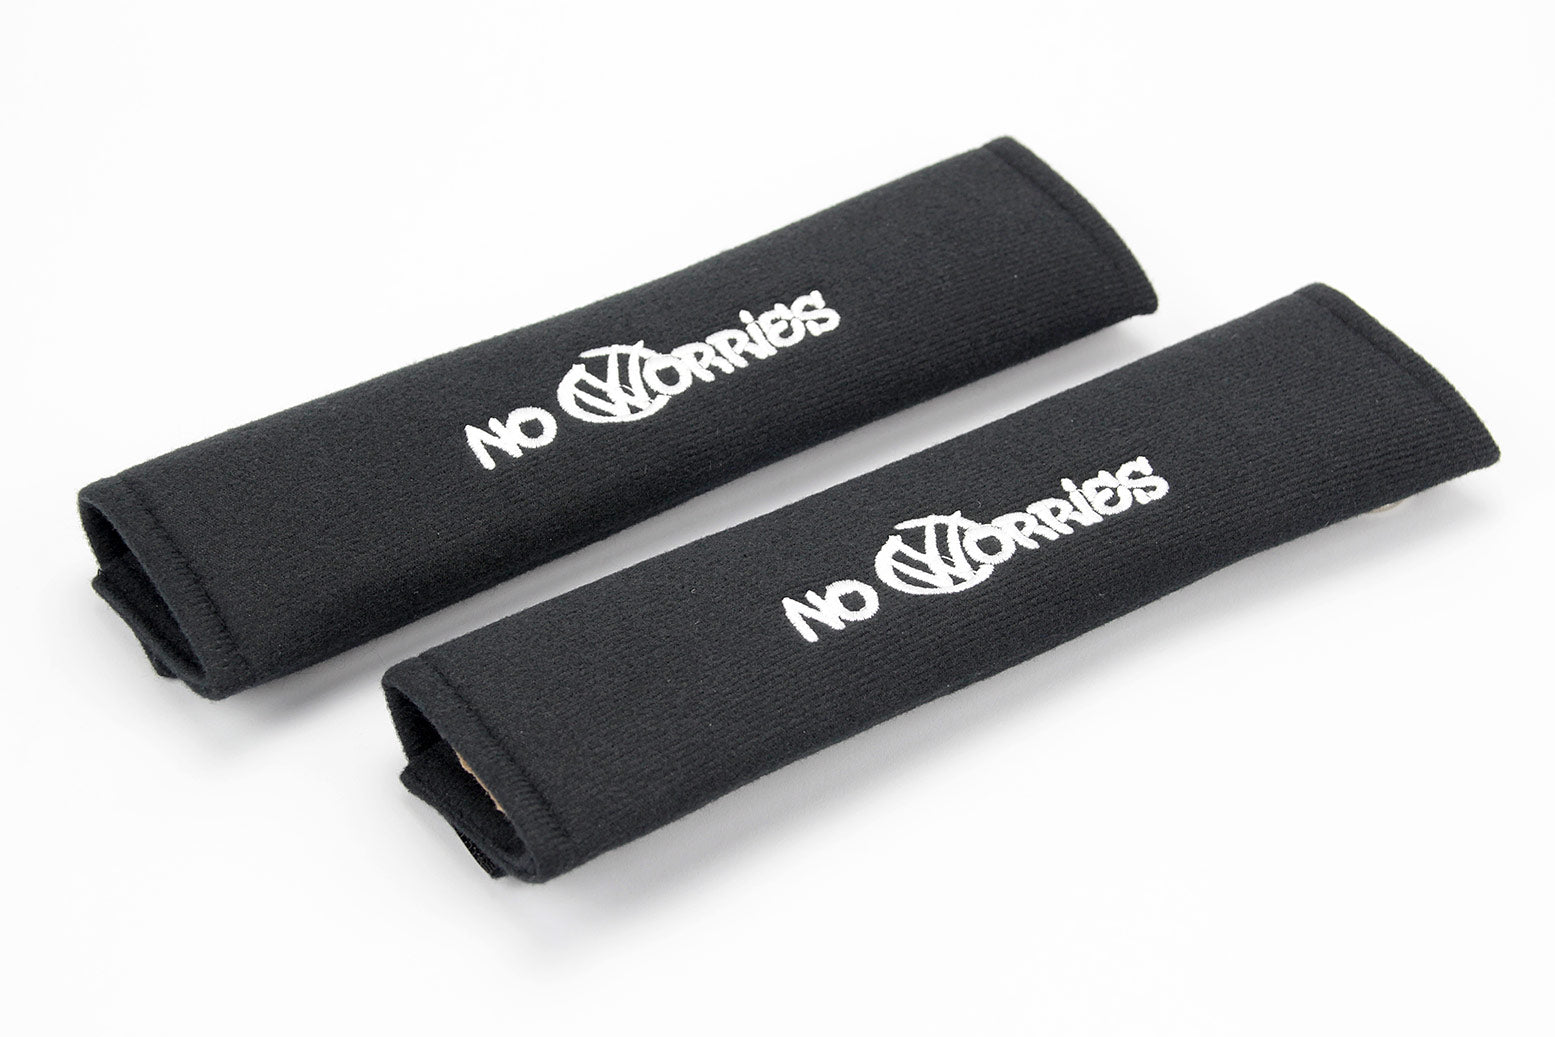 No Worries grafitti VW logo - Embroidered padded seat belt covers ...